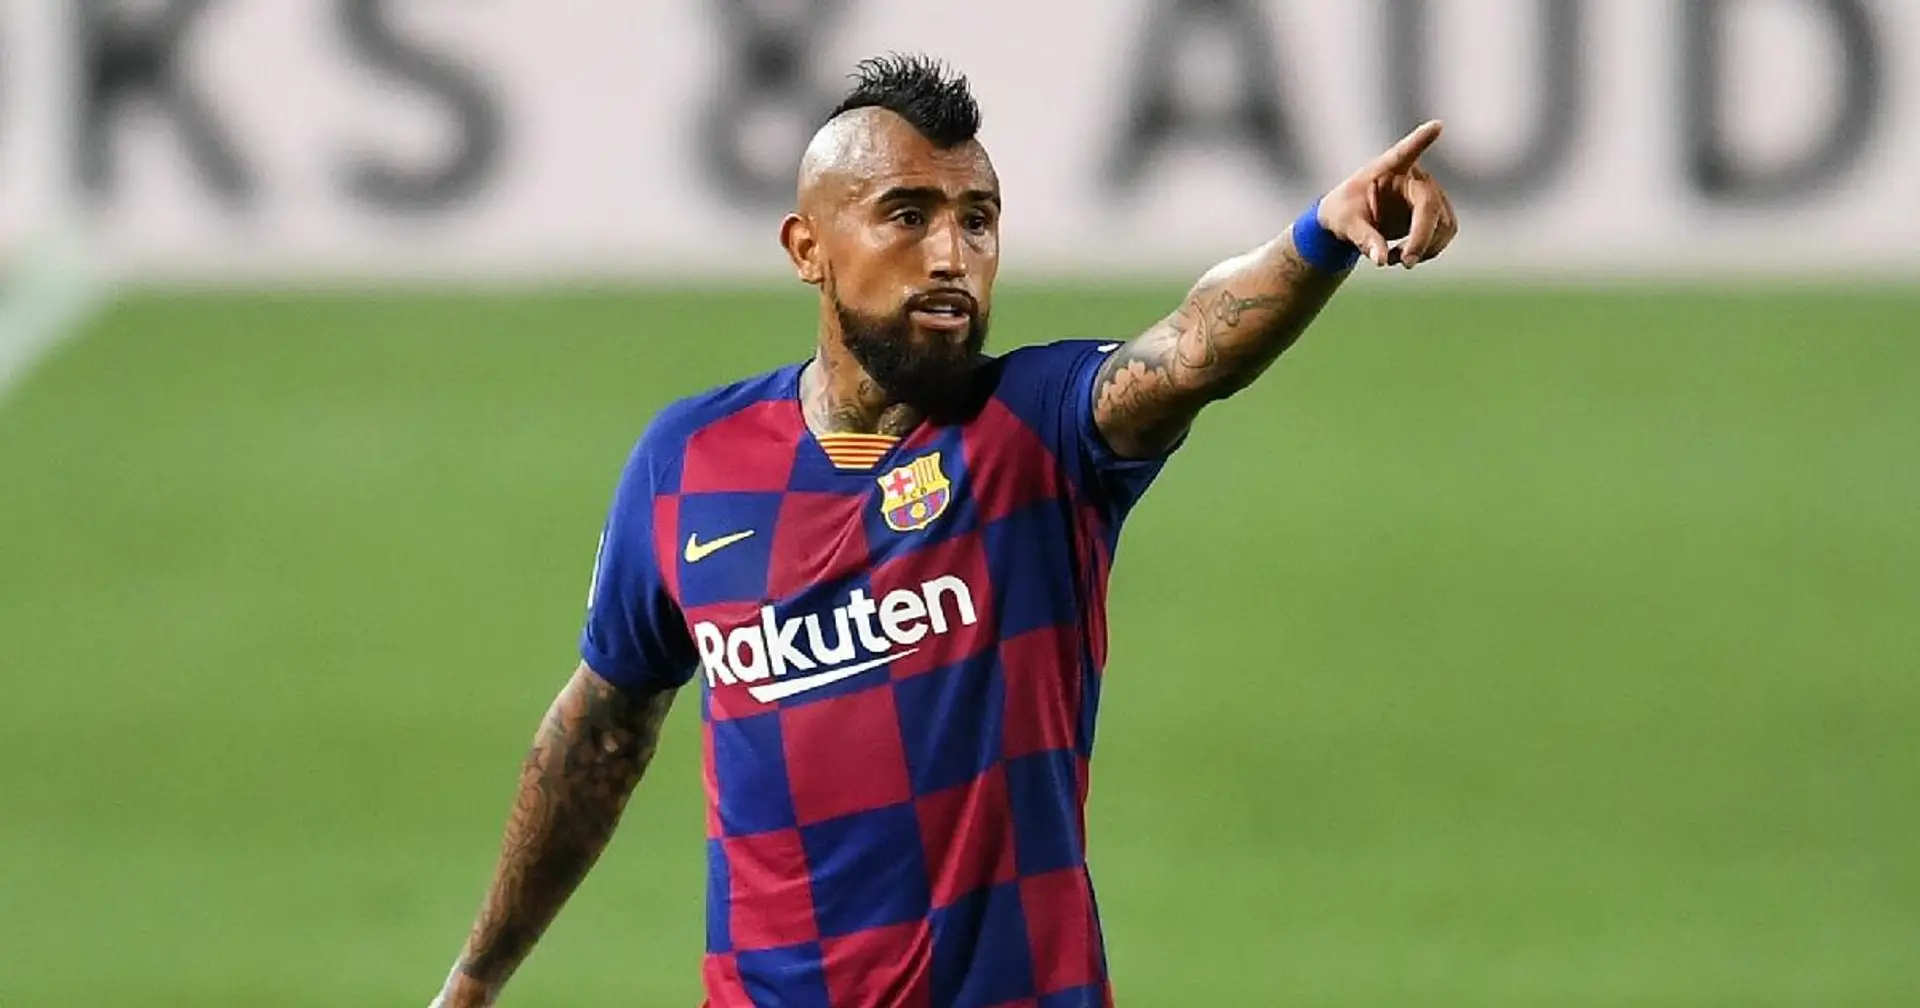 'You will always be in my heart': Arturo Vidal says goodbye to Barcelona